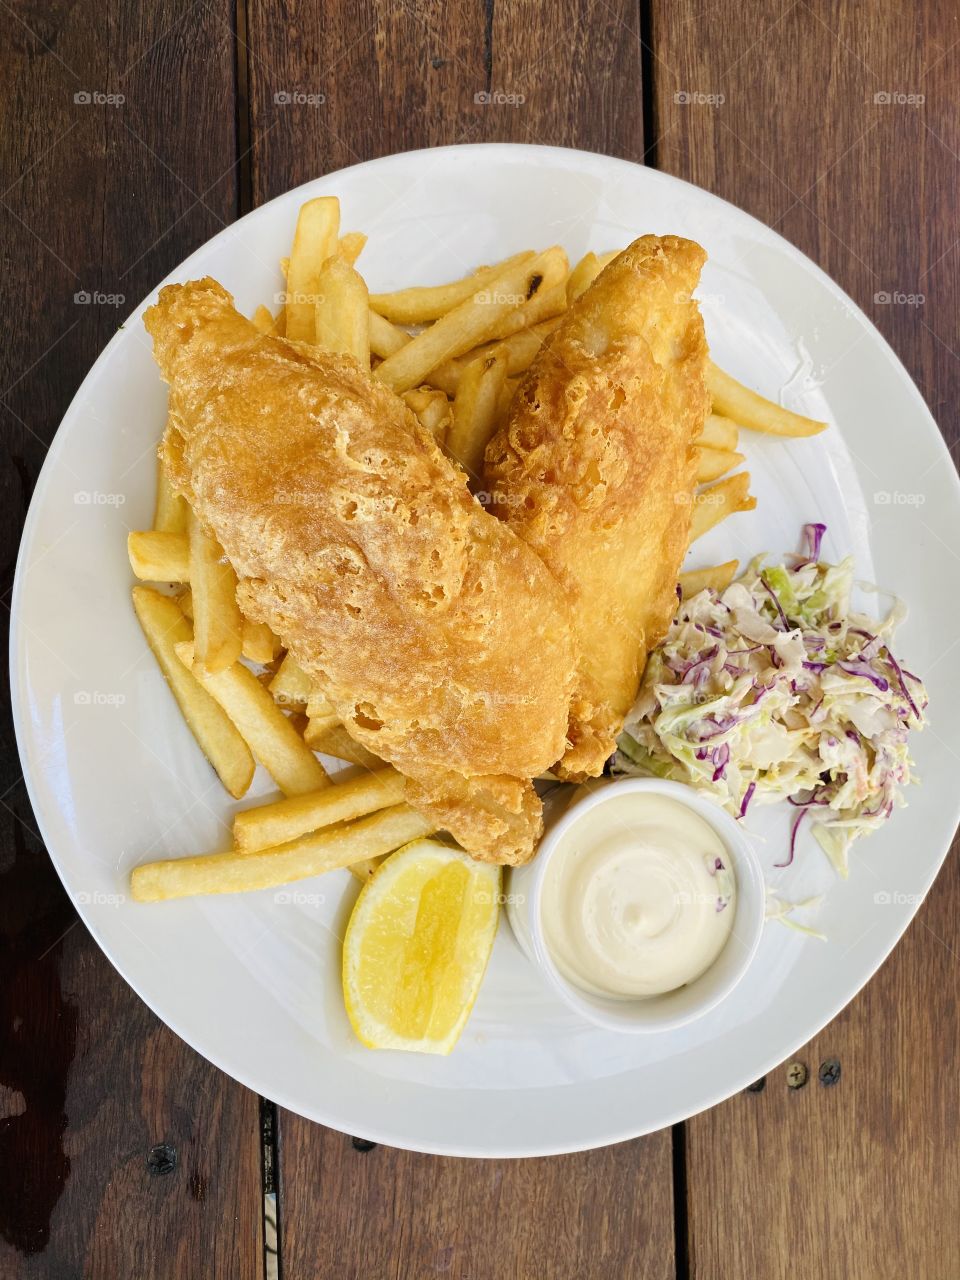 Crispy fish and chips